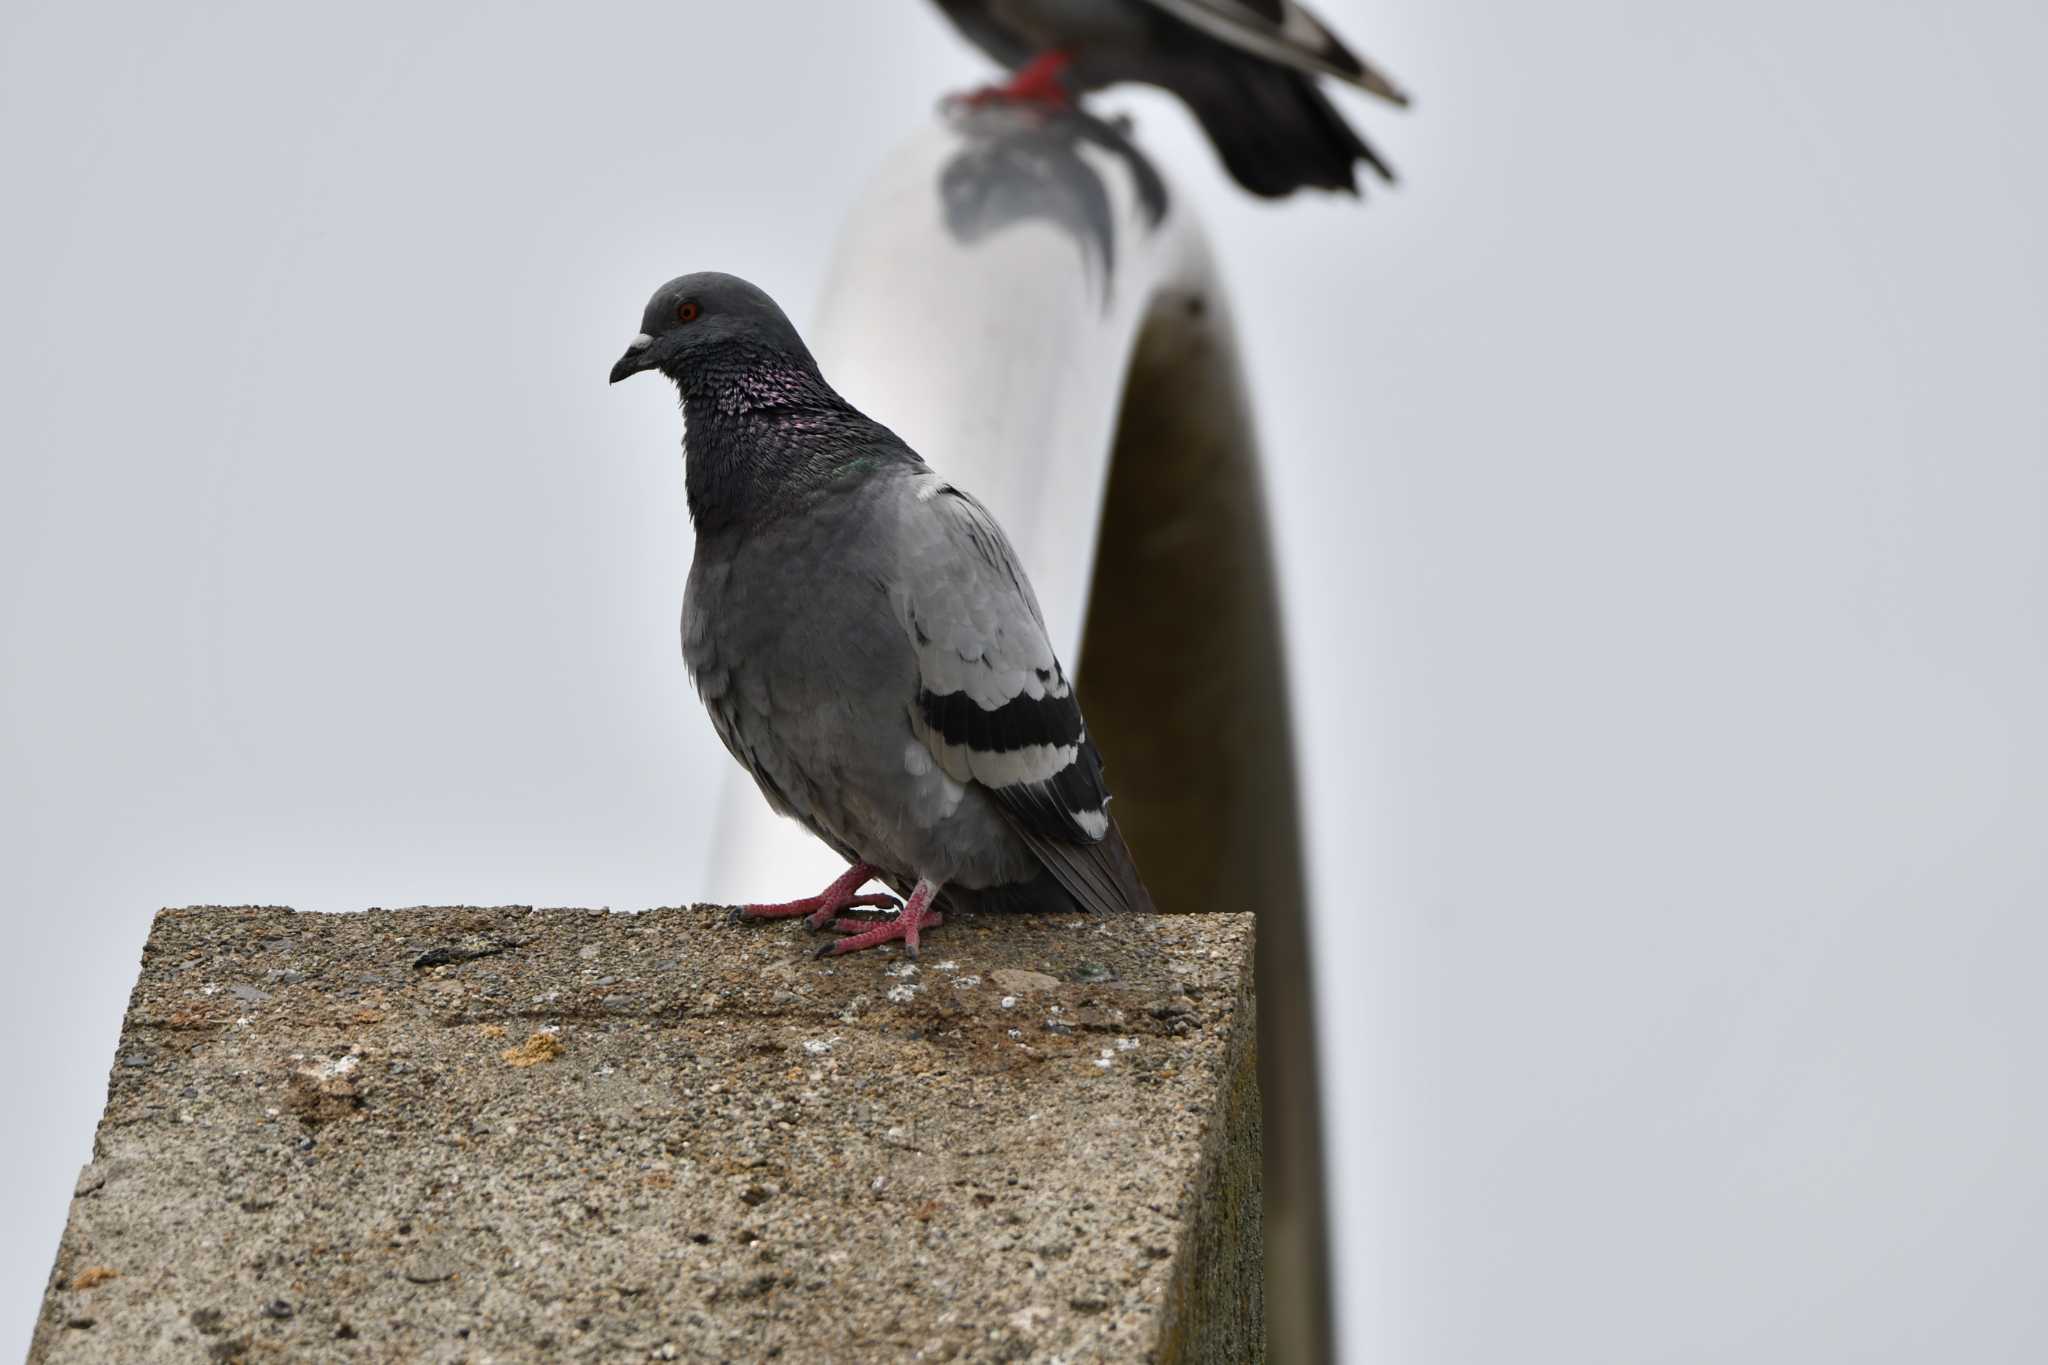 Photo of Rock Dove at エアフロントオアシス春日井 by みそ＠VM4A